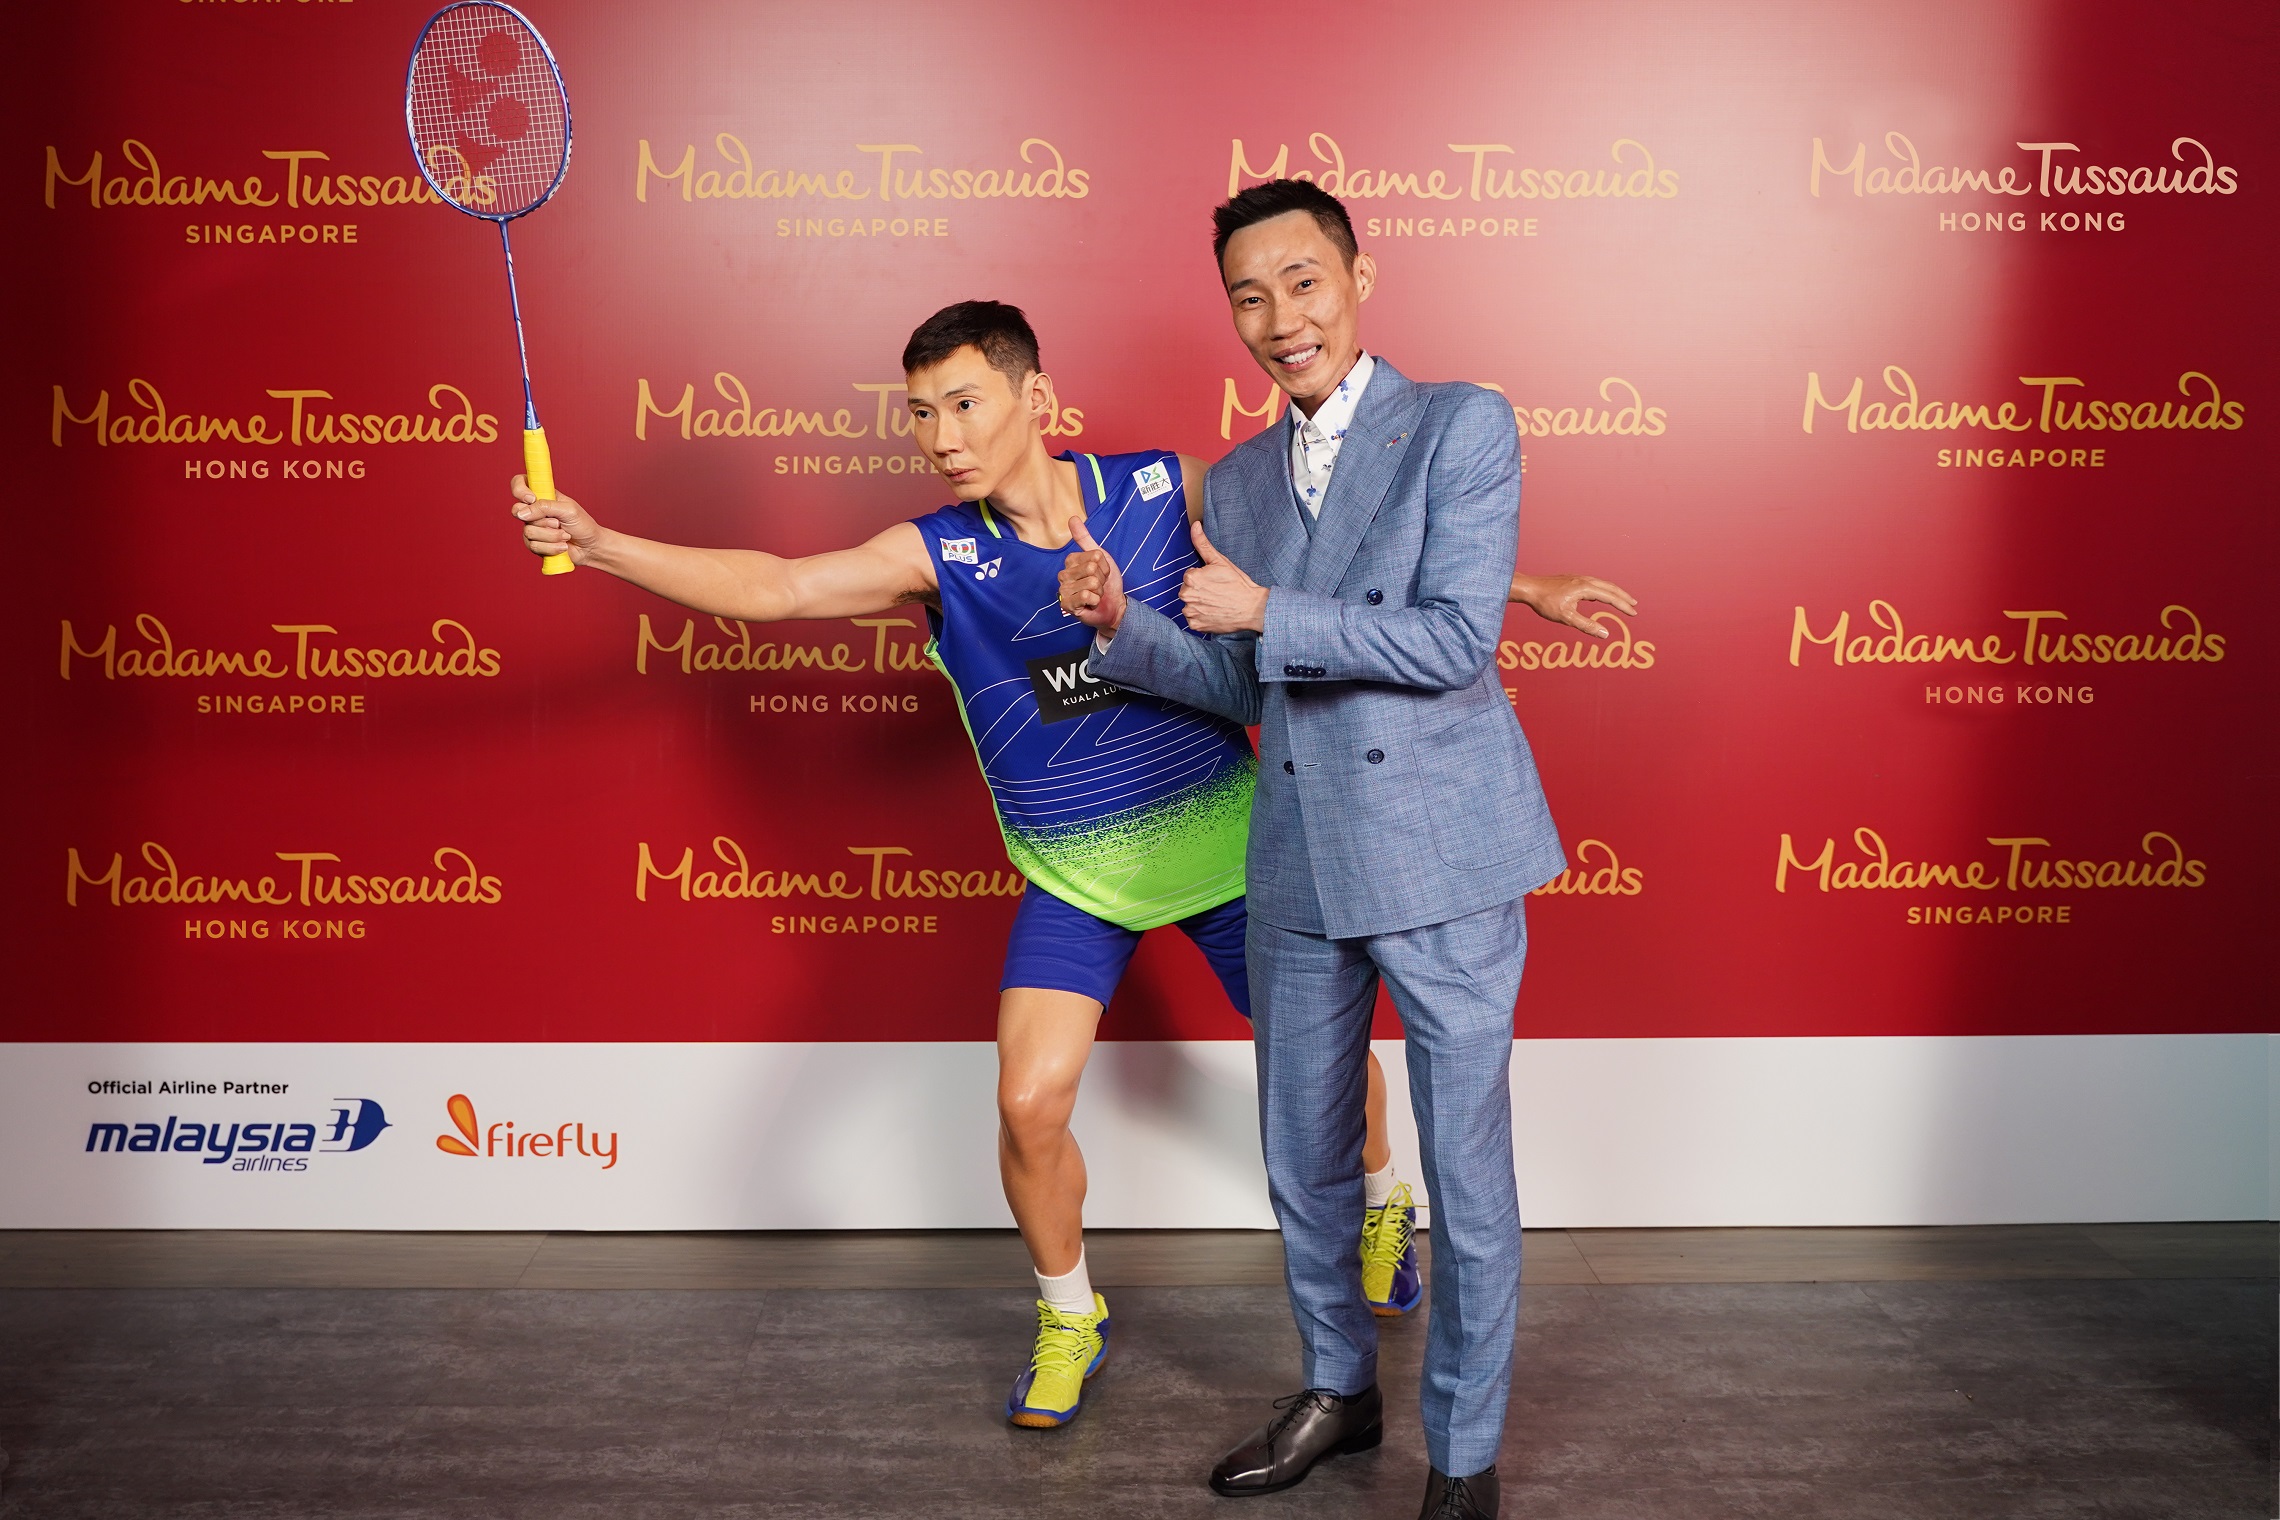 Datuk Lee Chong Wei standing next to his waxwork statue at Madame Tussauds. Image credit: Provided to WauPost